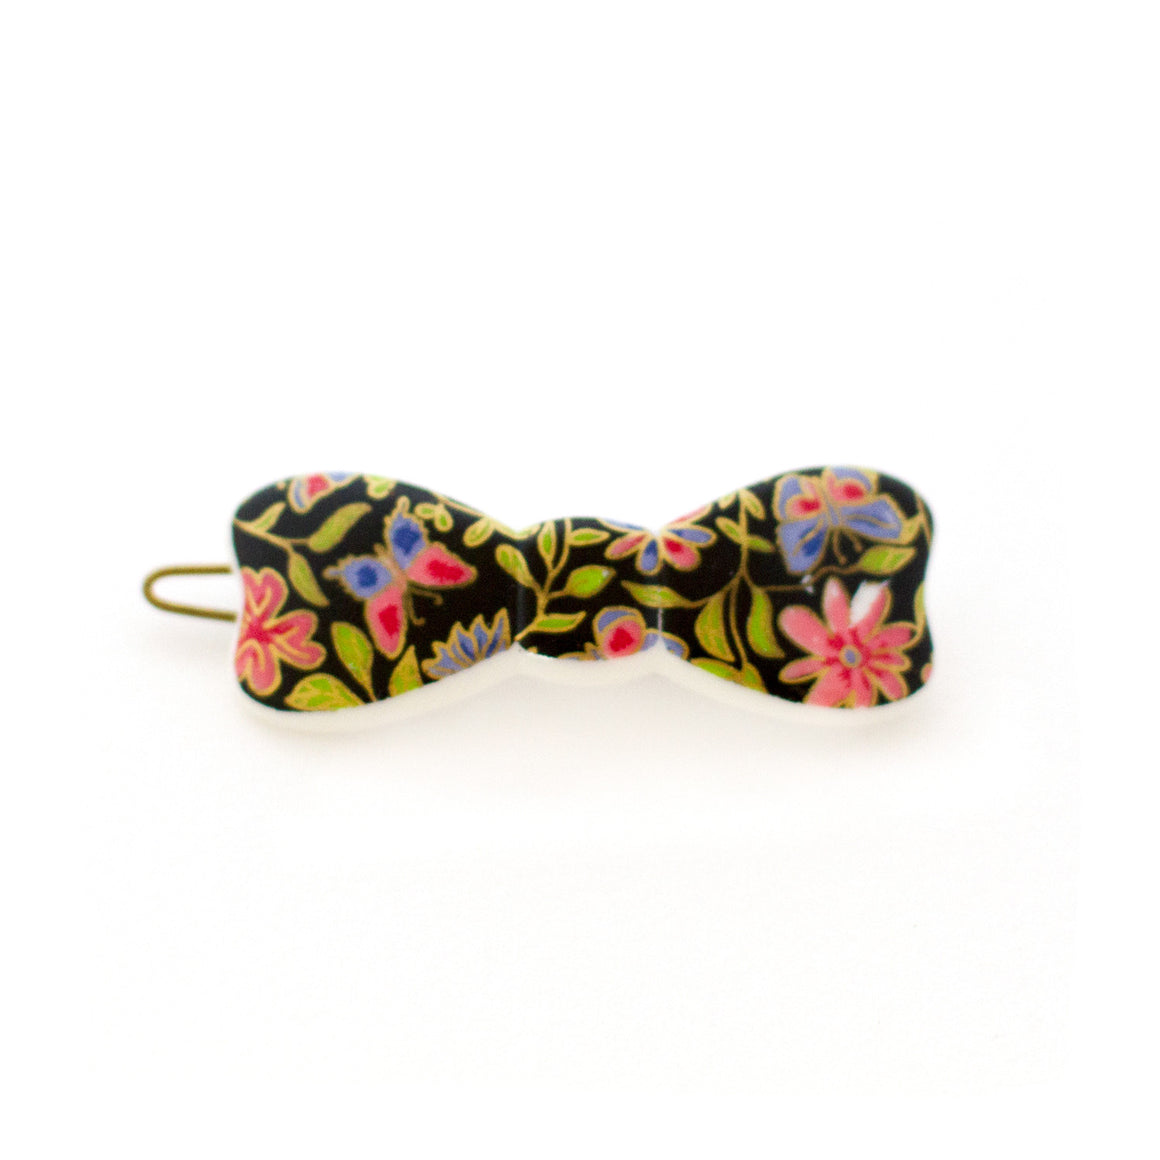 Vintage Bow Shaped Hair Clip - Liberty Style Floral Print - 1960s Made in France